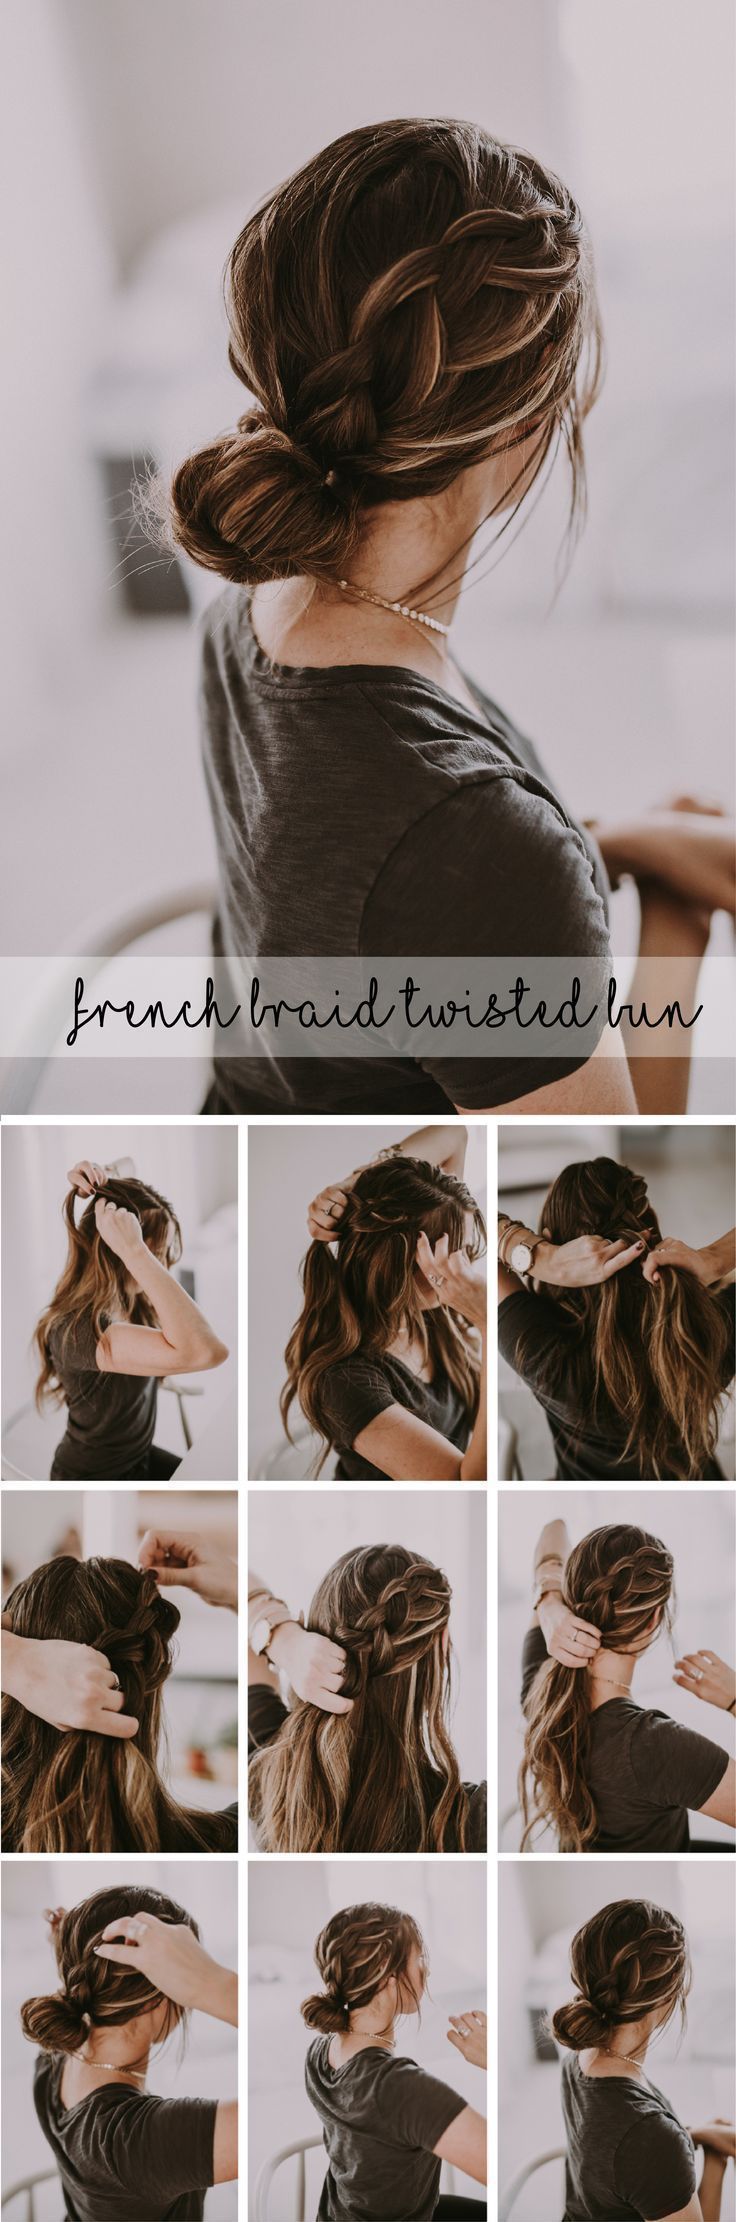 Beautiful french braid twisted bun up-do hairstyle. Perfect dressed up for holiday parties or paired with your sweatshirt and